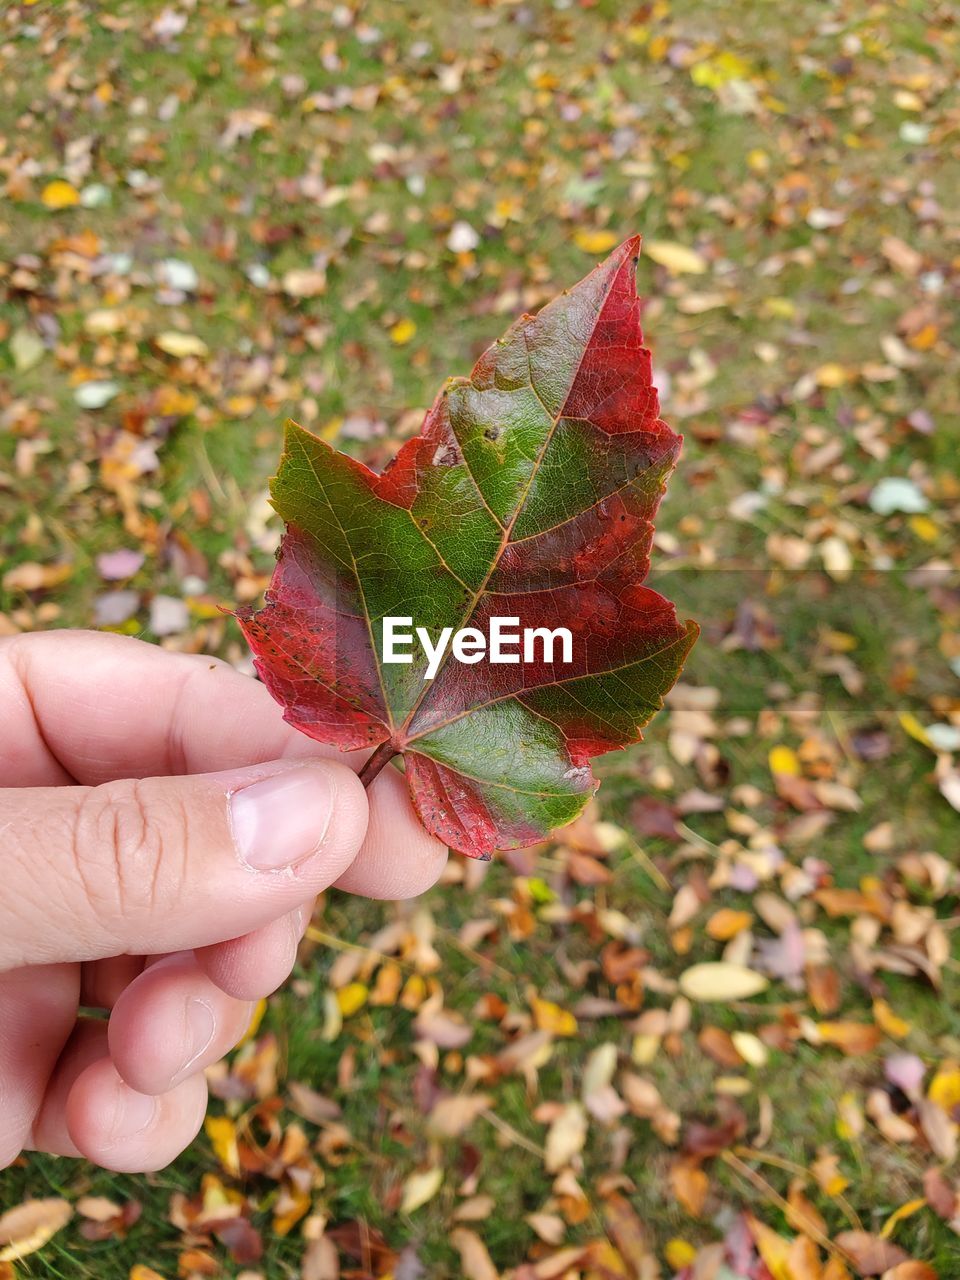 Cropped hand holding maple leaves during autumn